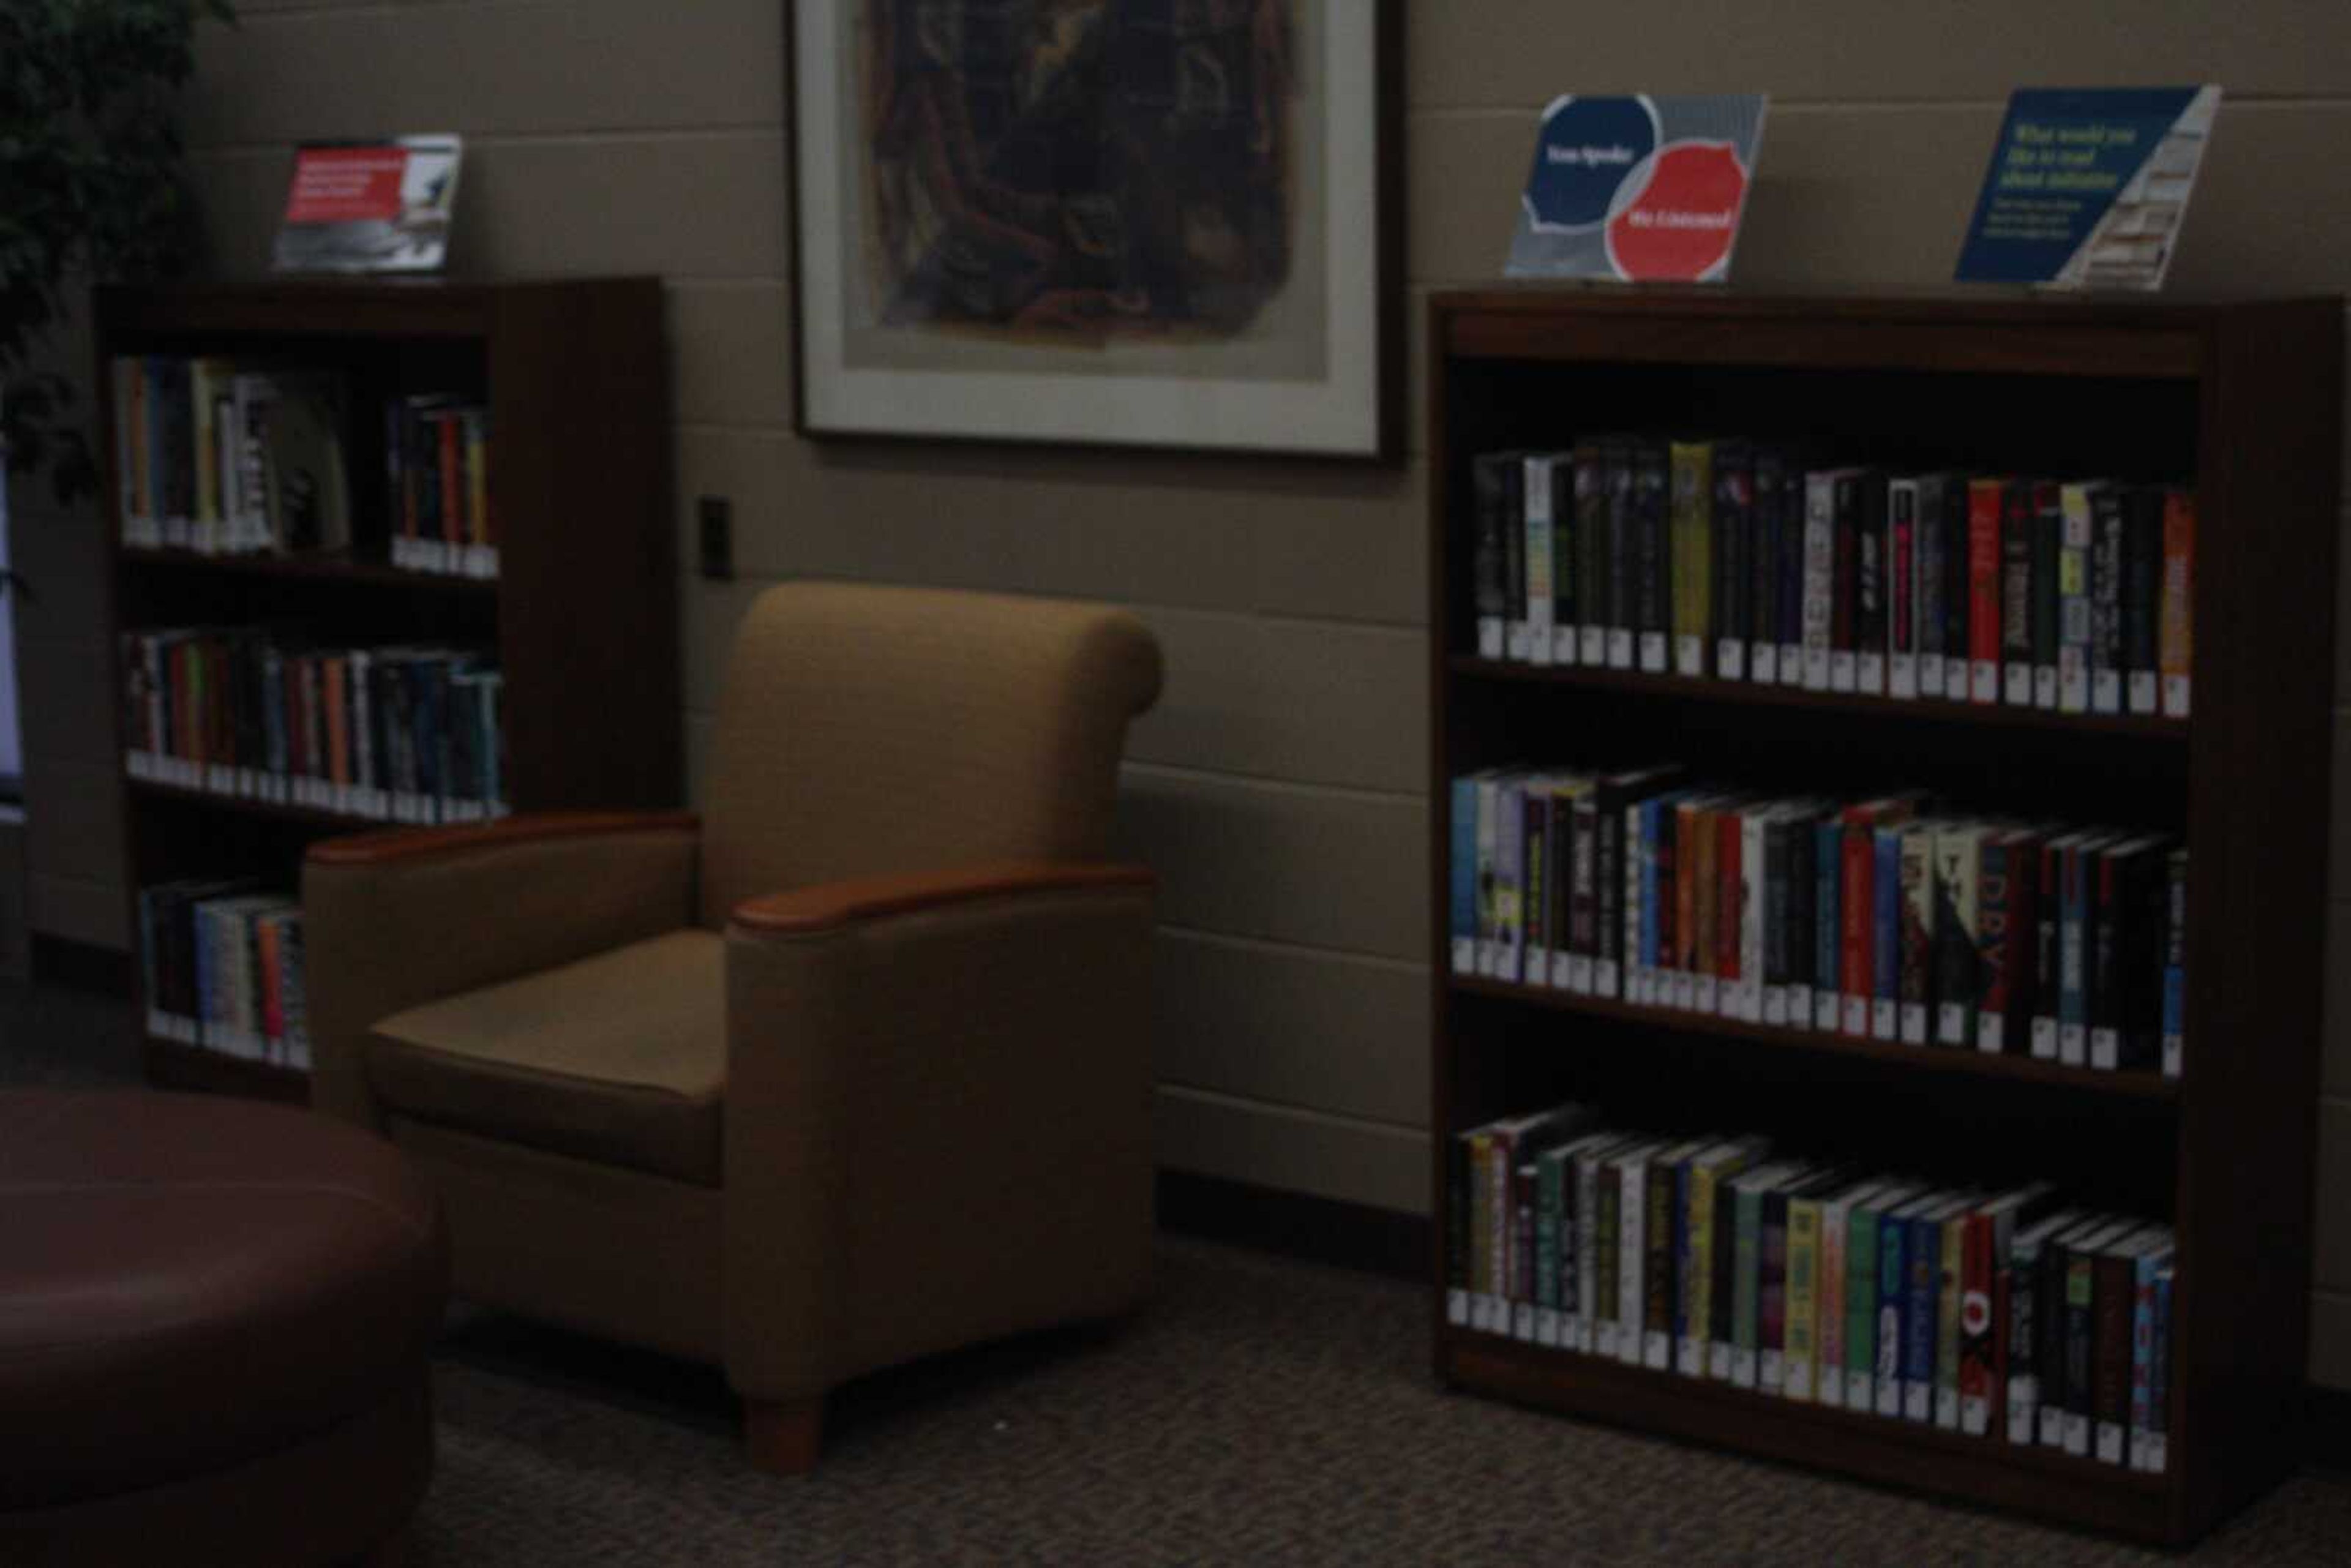 New Kent Library pilot project offers students opportunity to build library collection